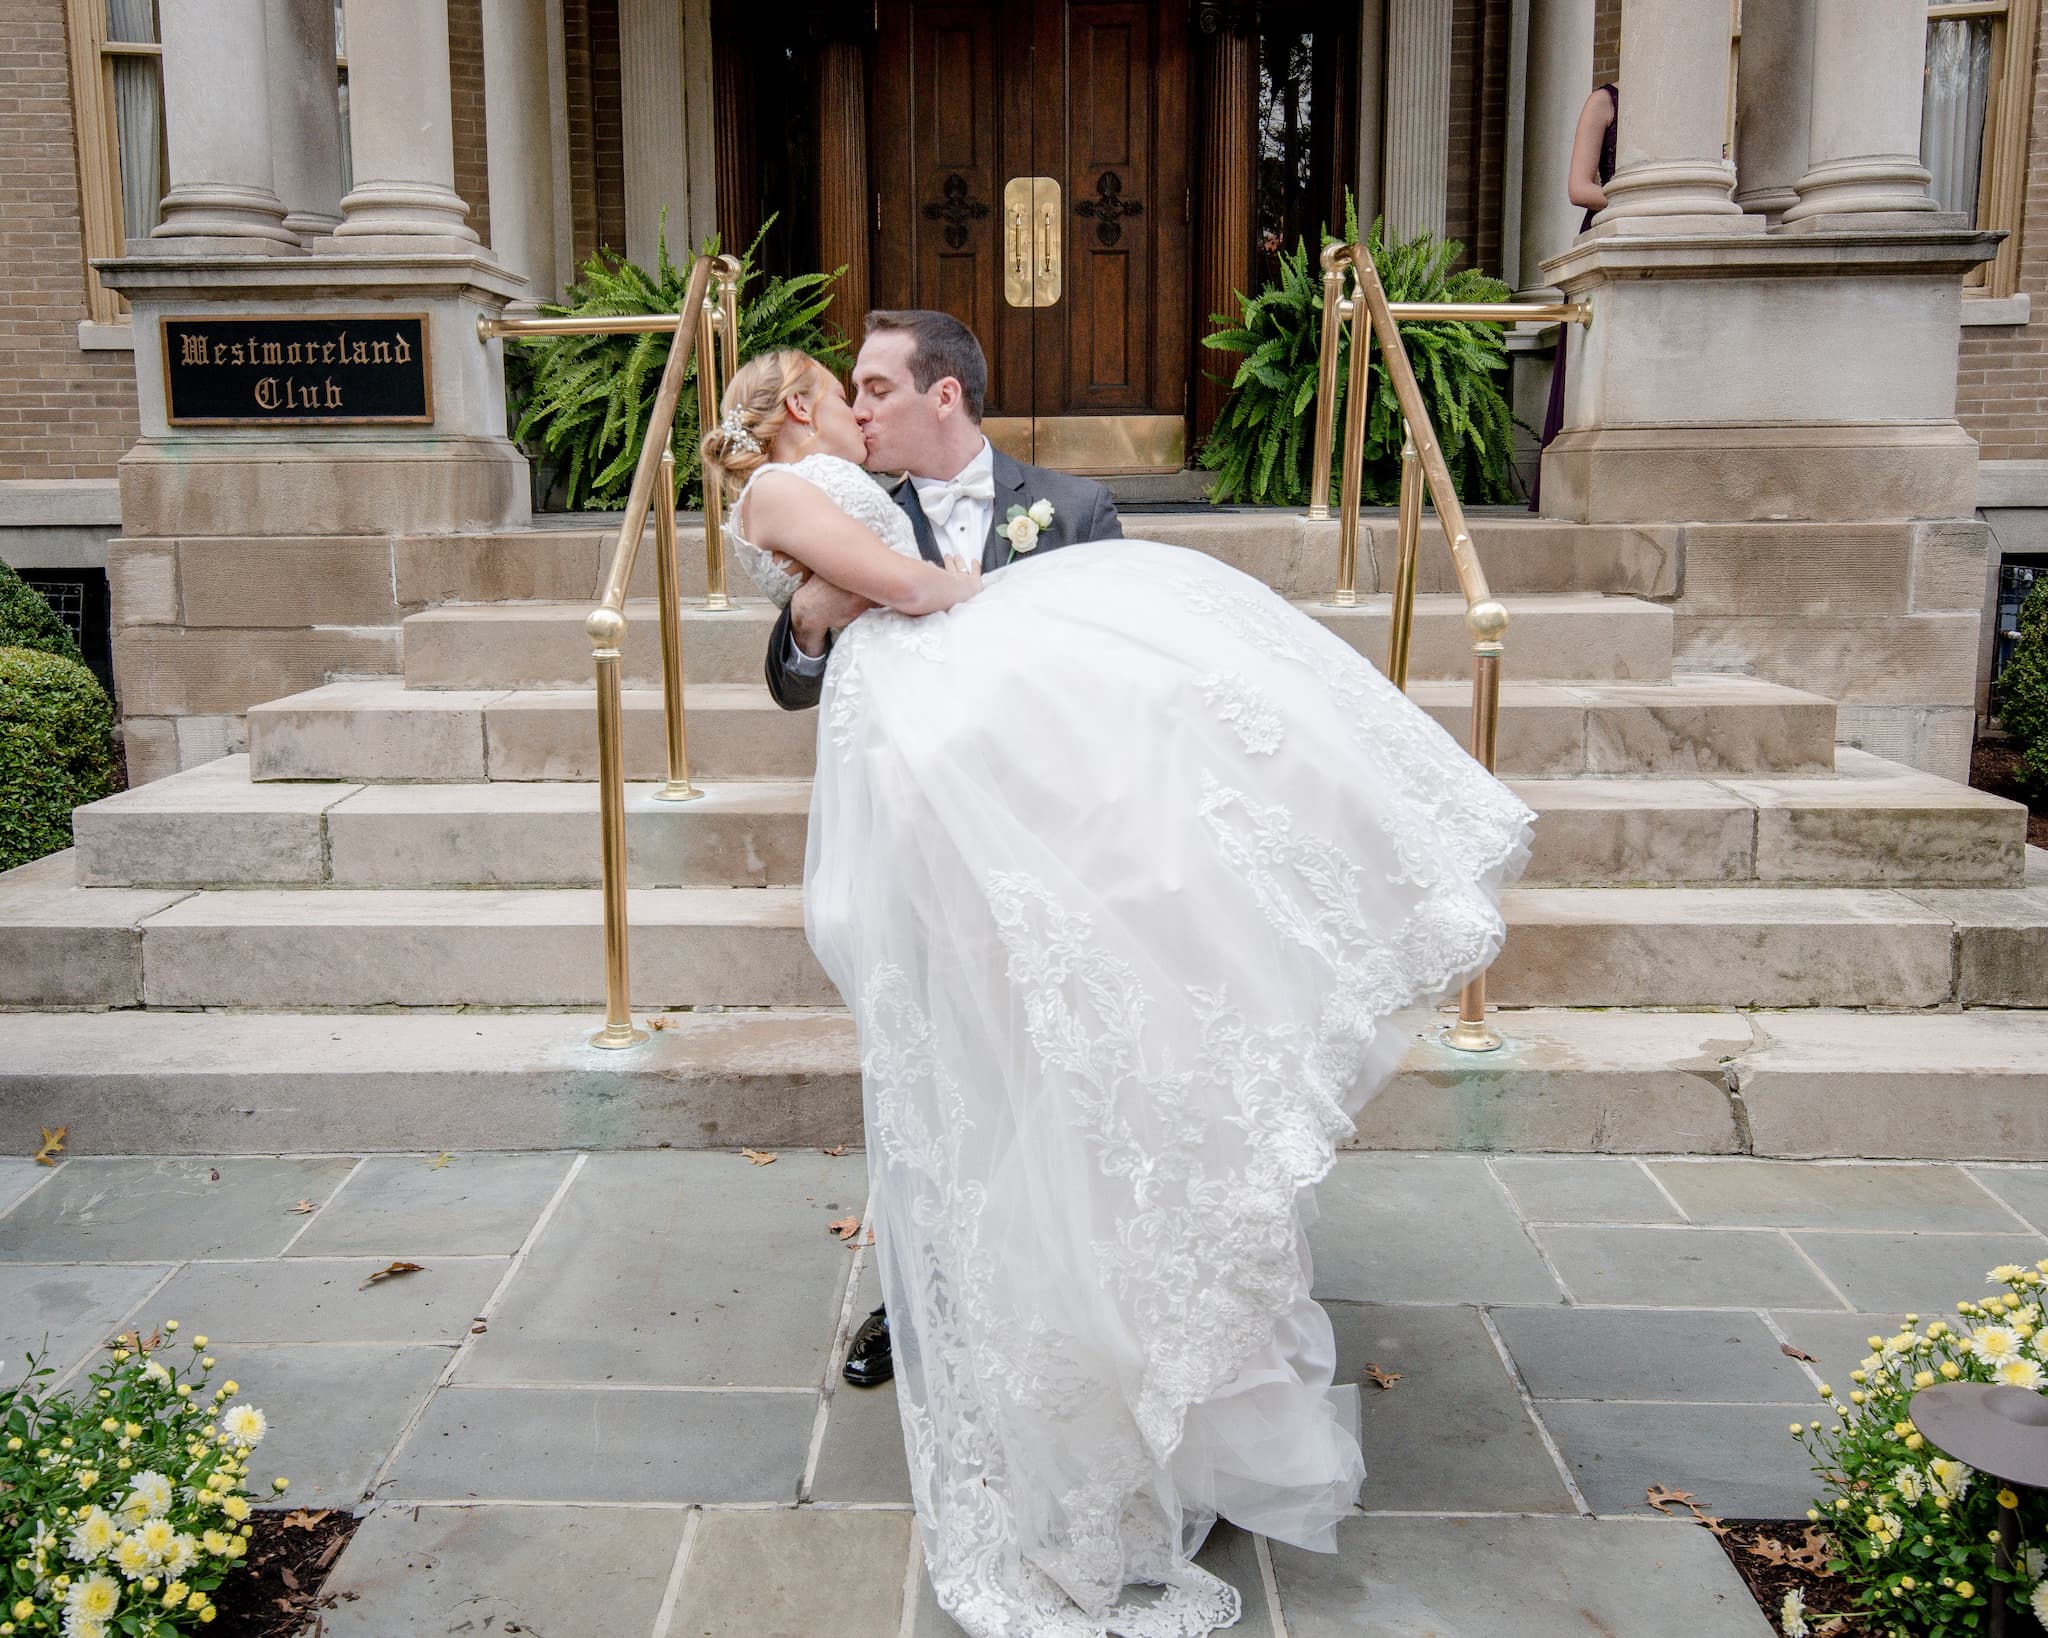 A Magical Wedding Day at Westmorland Club, Wilkes Barre